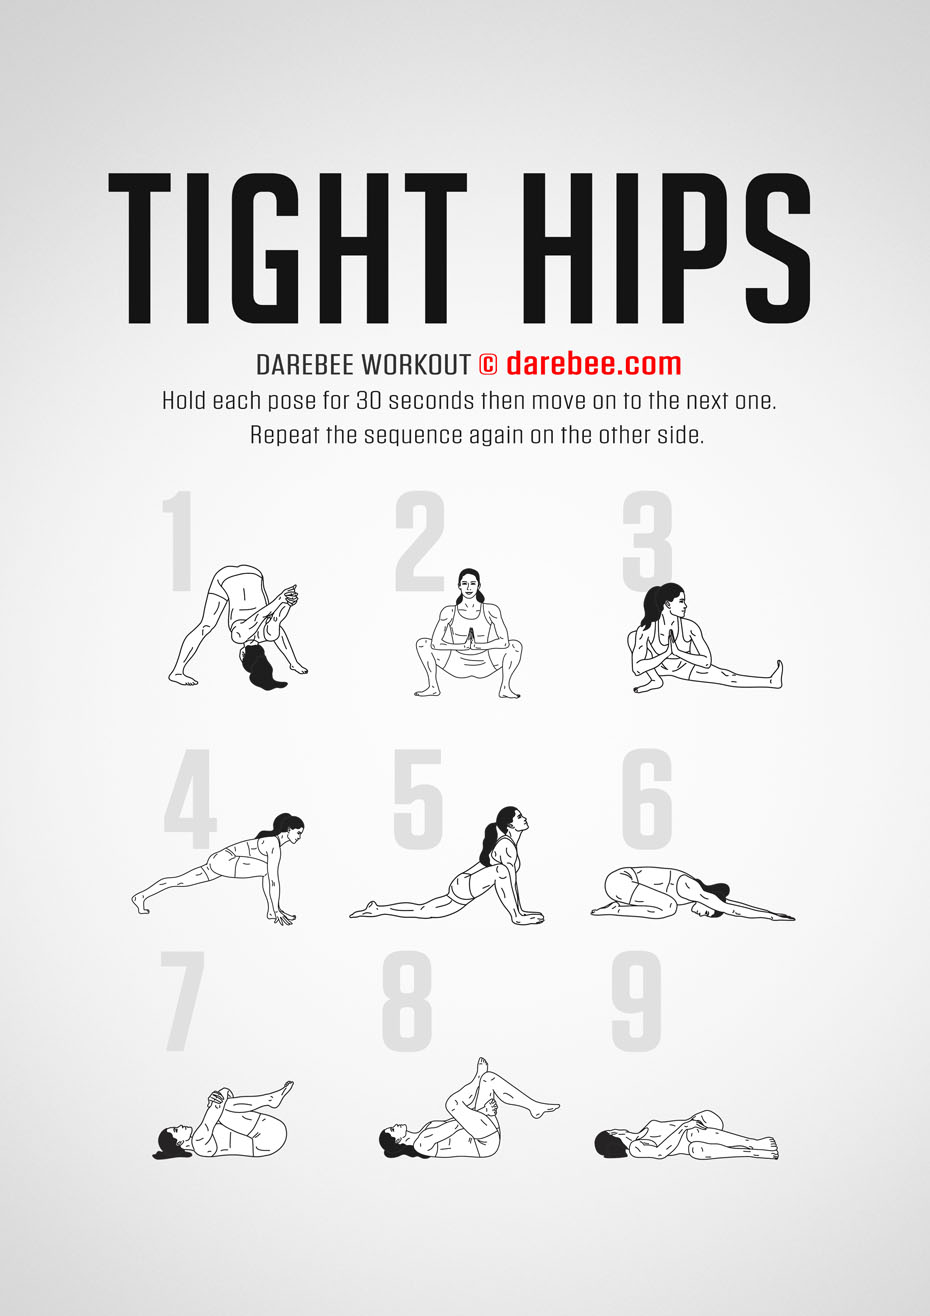 Tight Hips is a workout that helps you improve flexibility on your hips and pelvic girdle which helps prevent injury and gives a greater sense of freedom when you move.